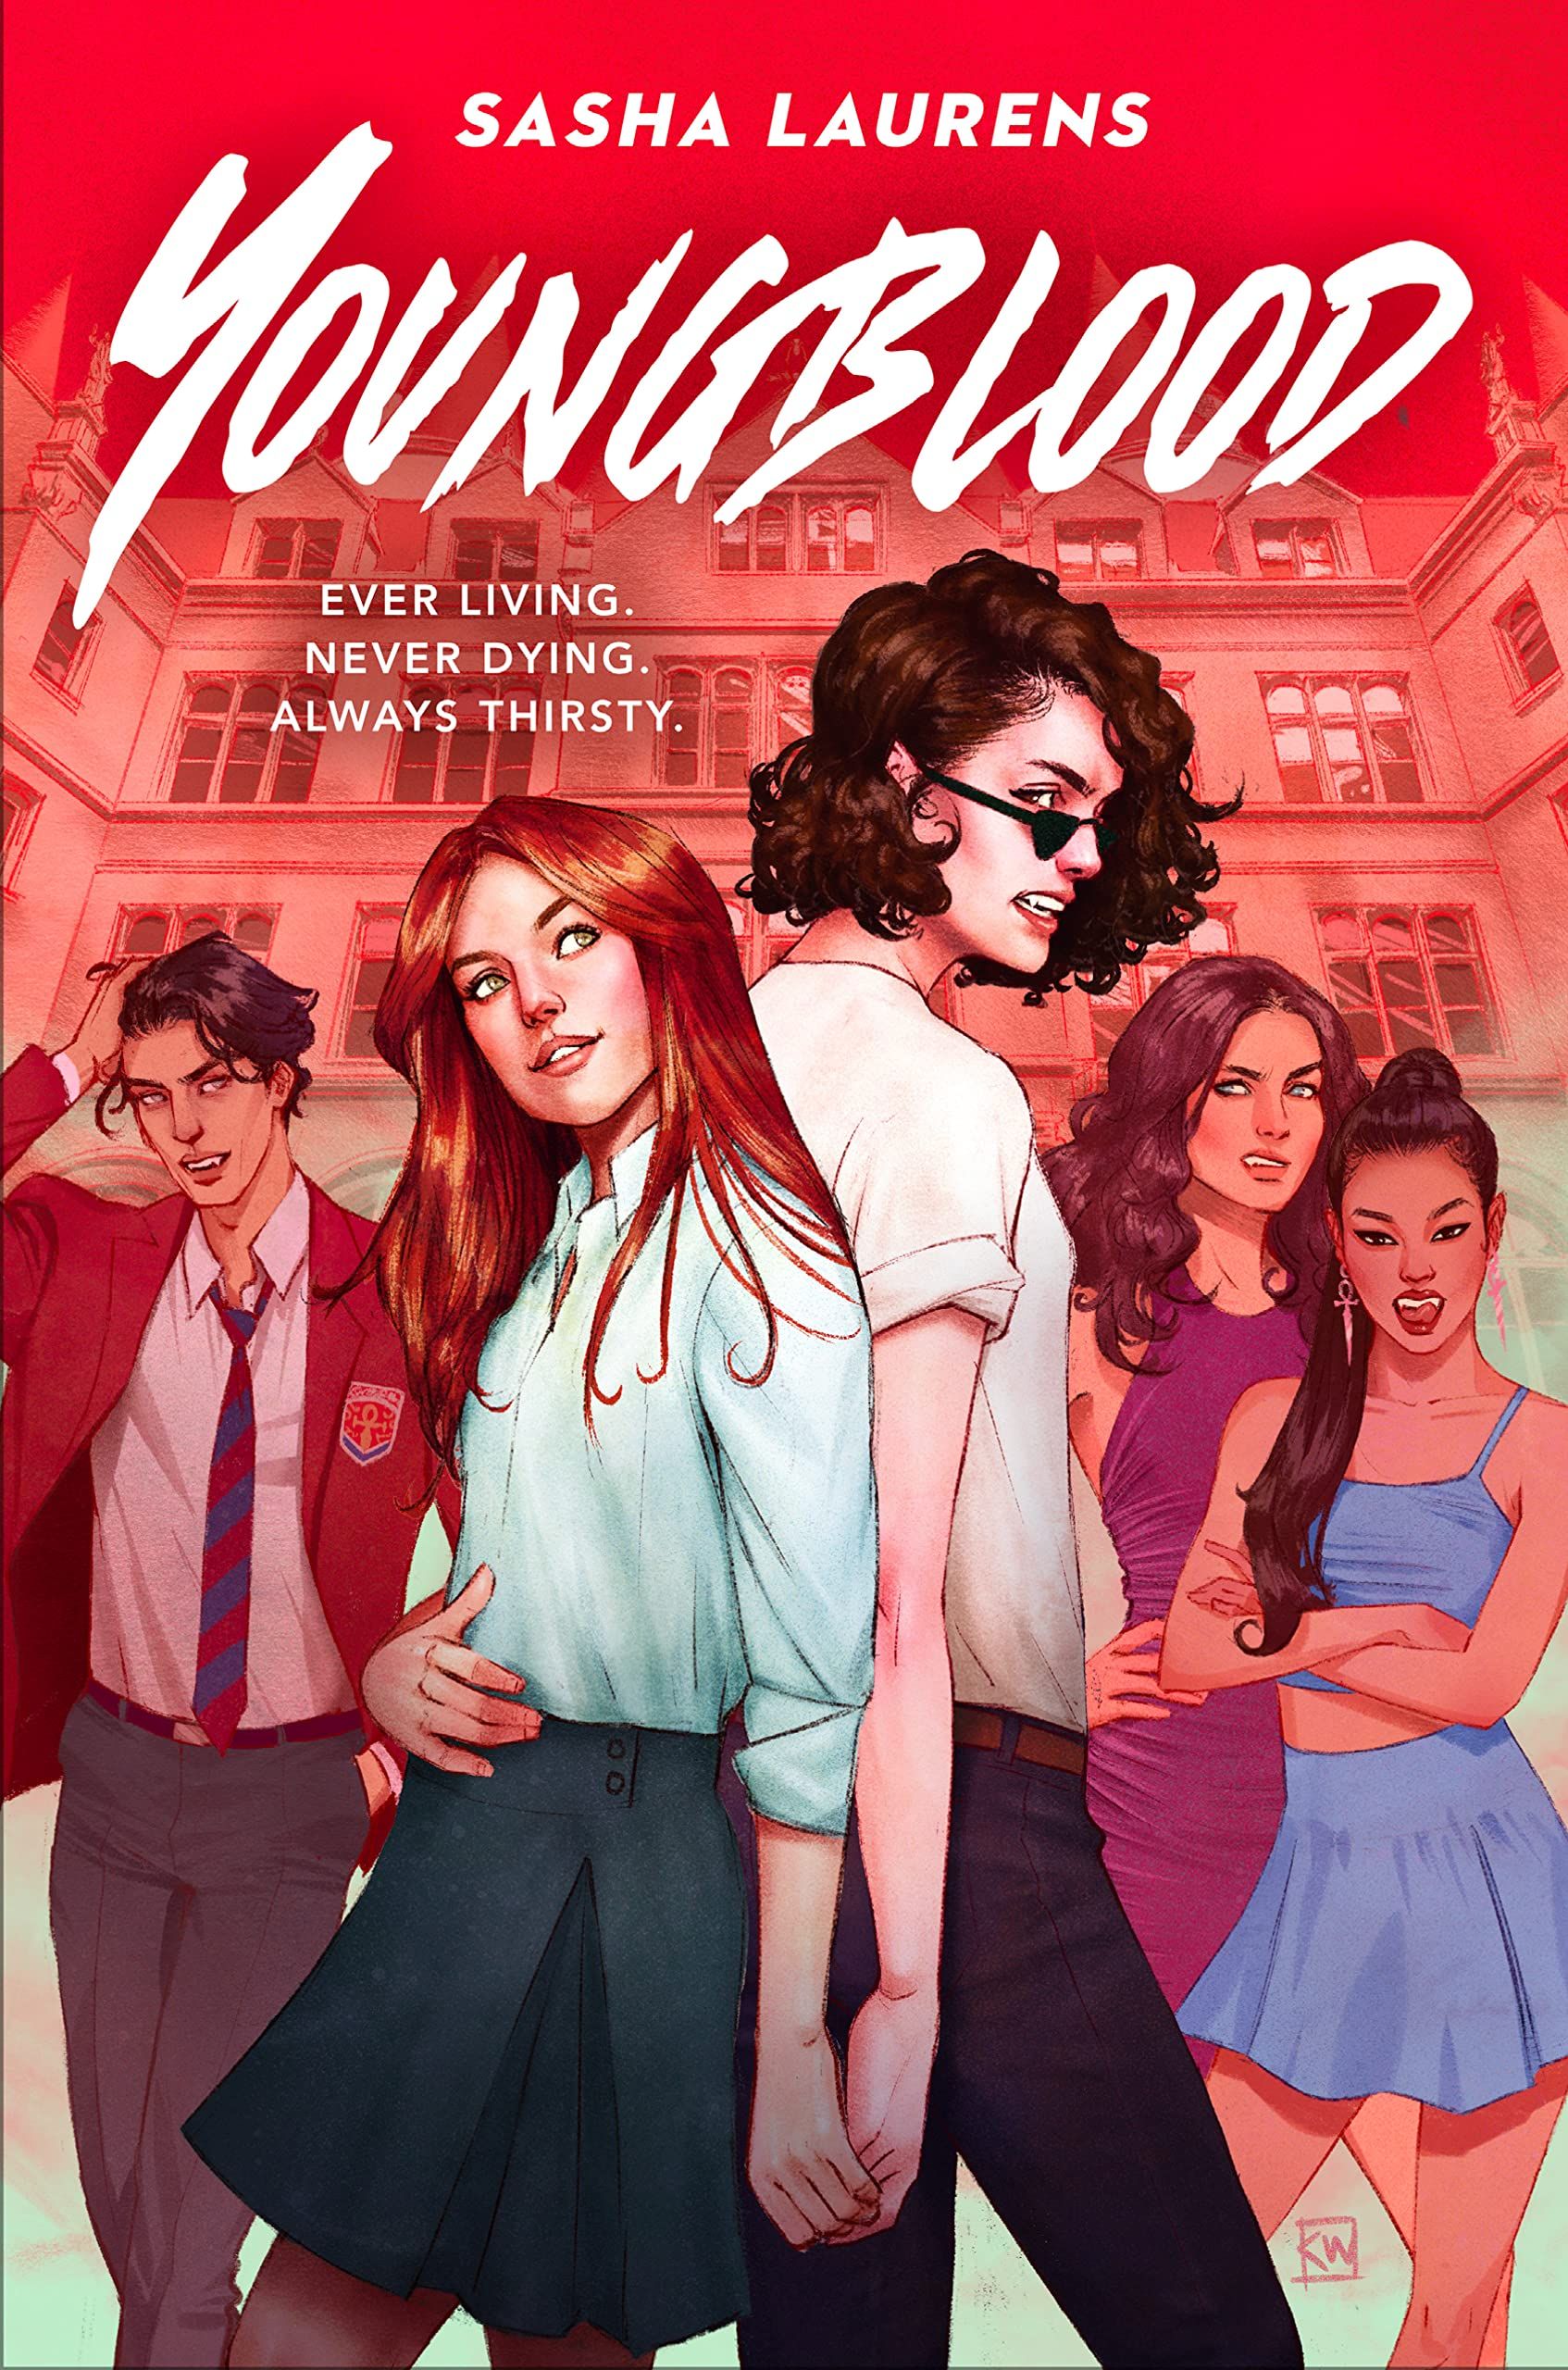 Cover image of "Youngblood" by Sasha Laurens.